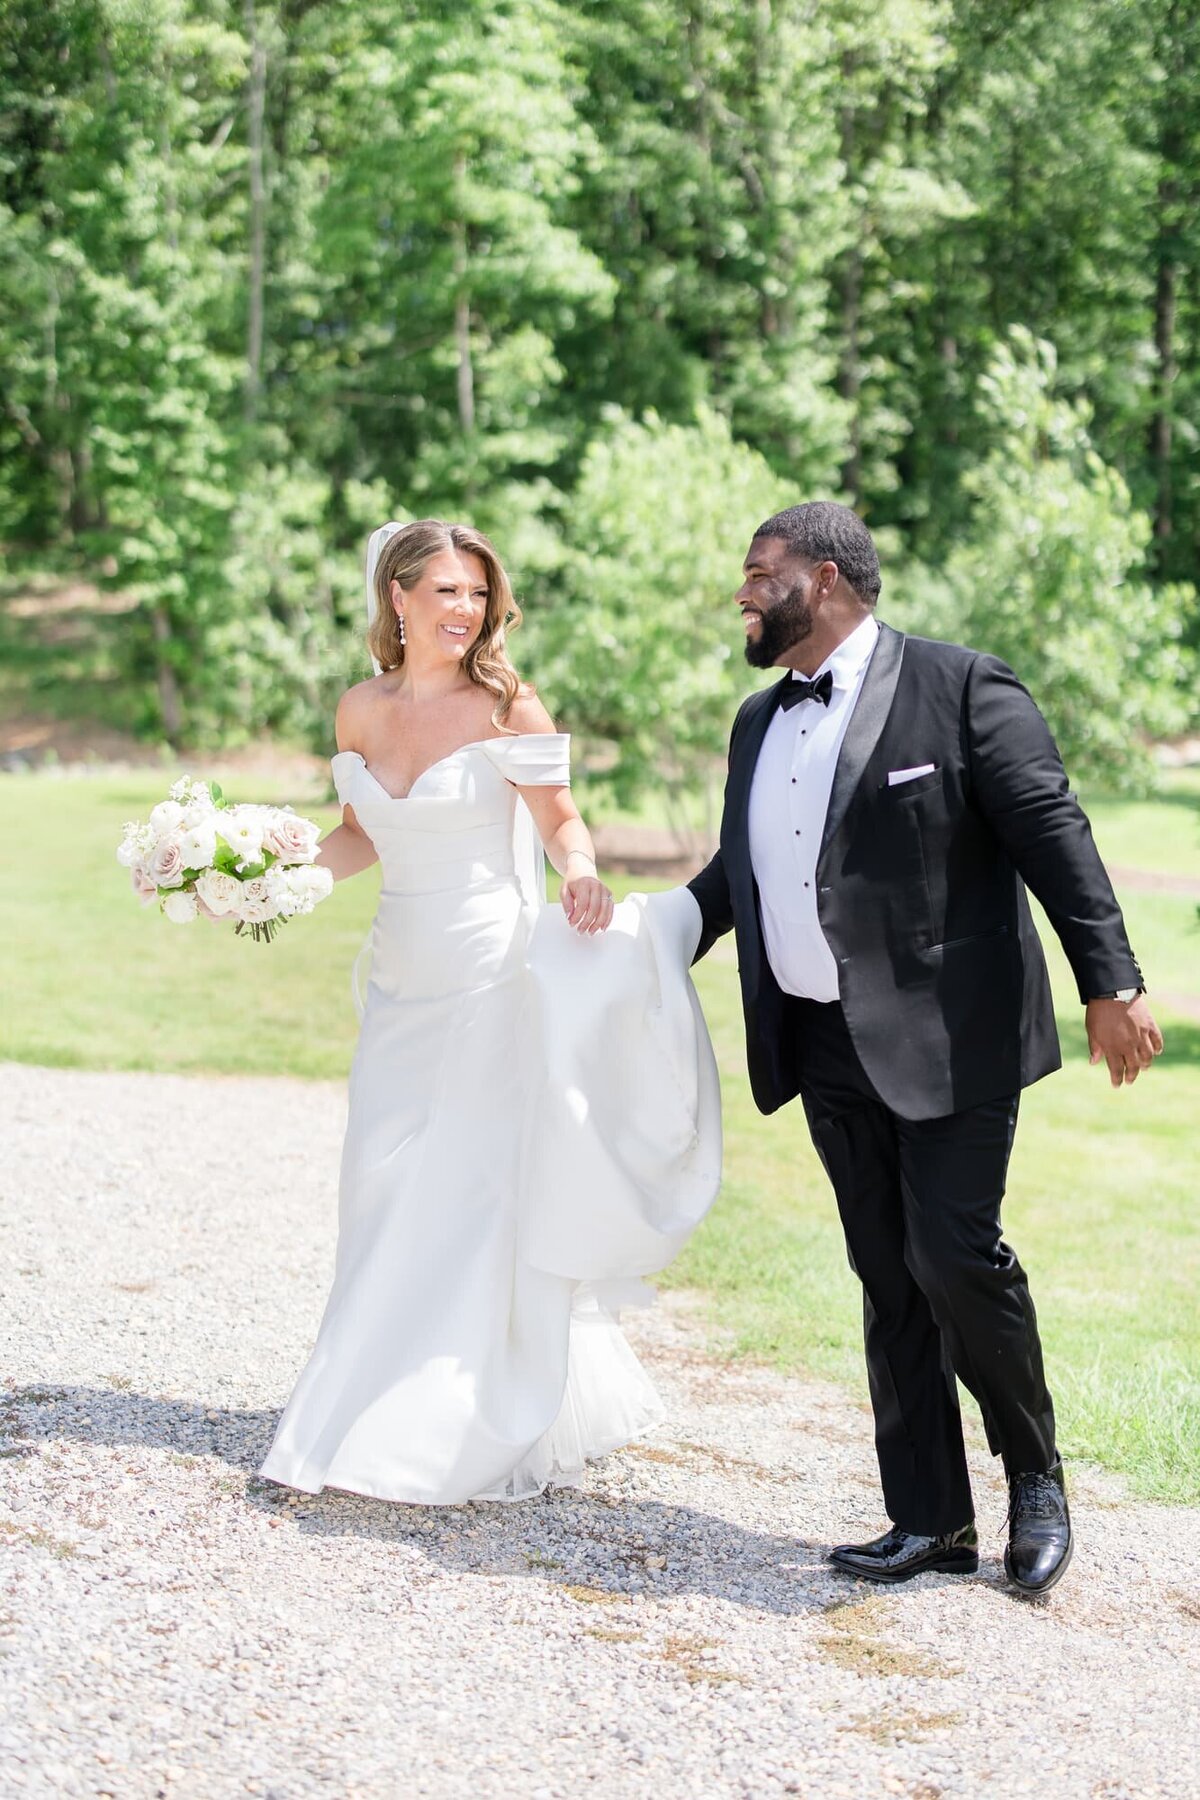 Katie and Alec Wedding Photography Wedding Videography Birmingham, Alabama Husband and Wife Team Photo Video Weddings Engagement Engagements Light Airy Focused on Marriage  Rachel + Eric's Oak Meado_QHYt